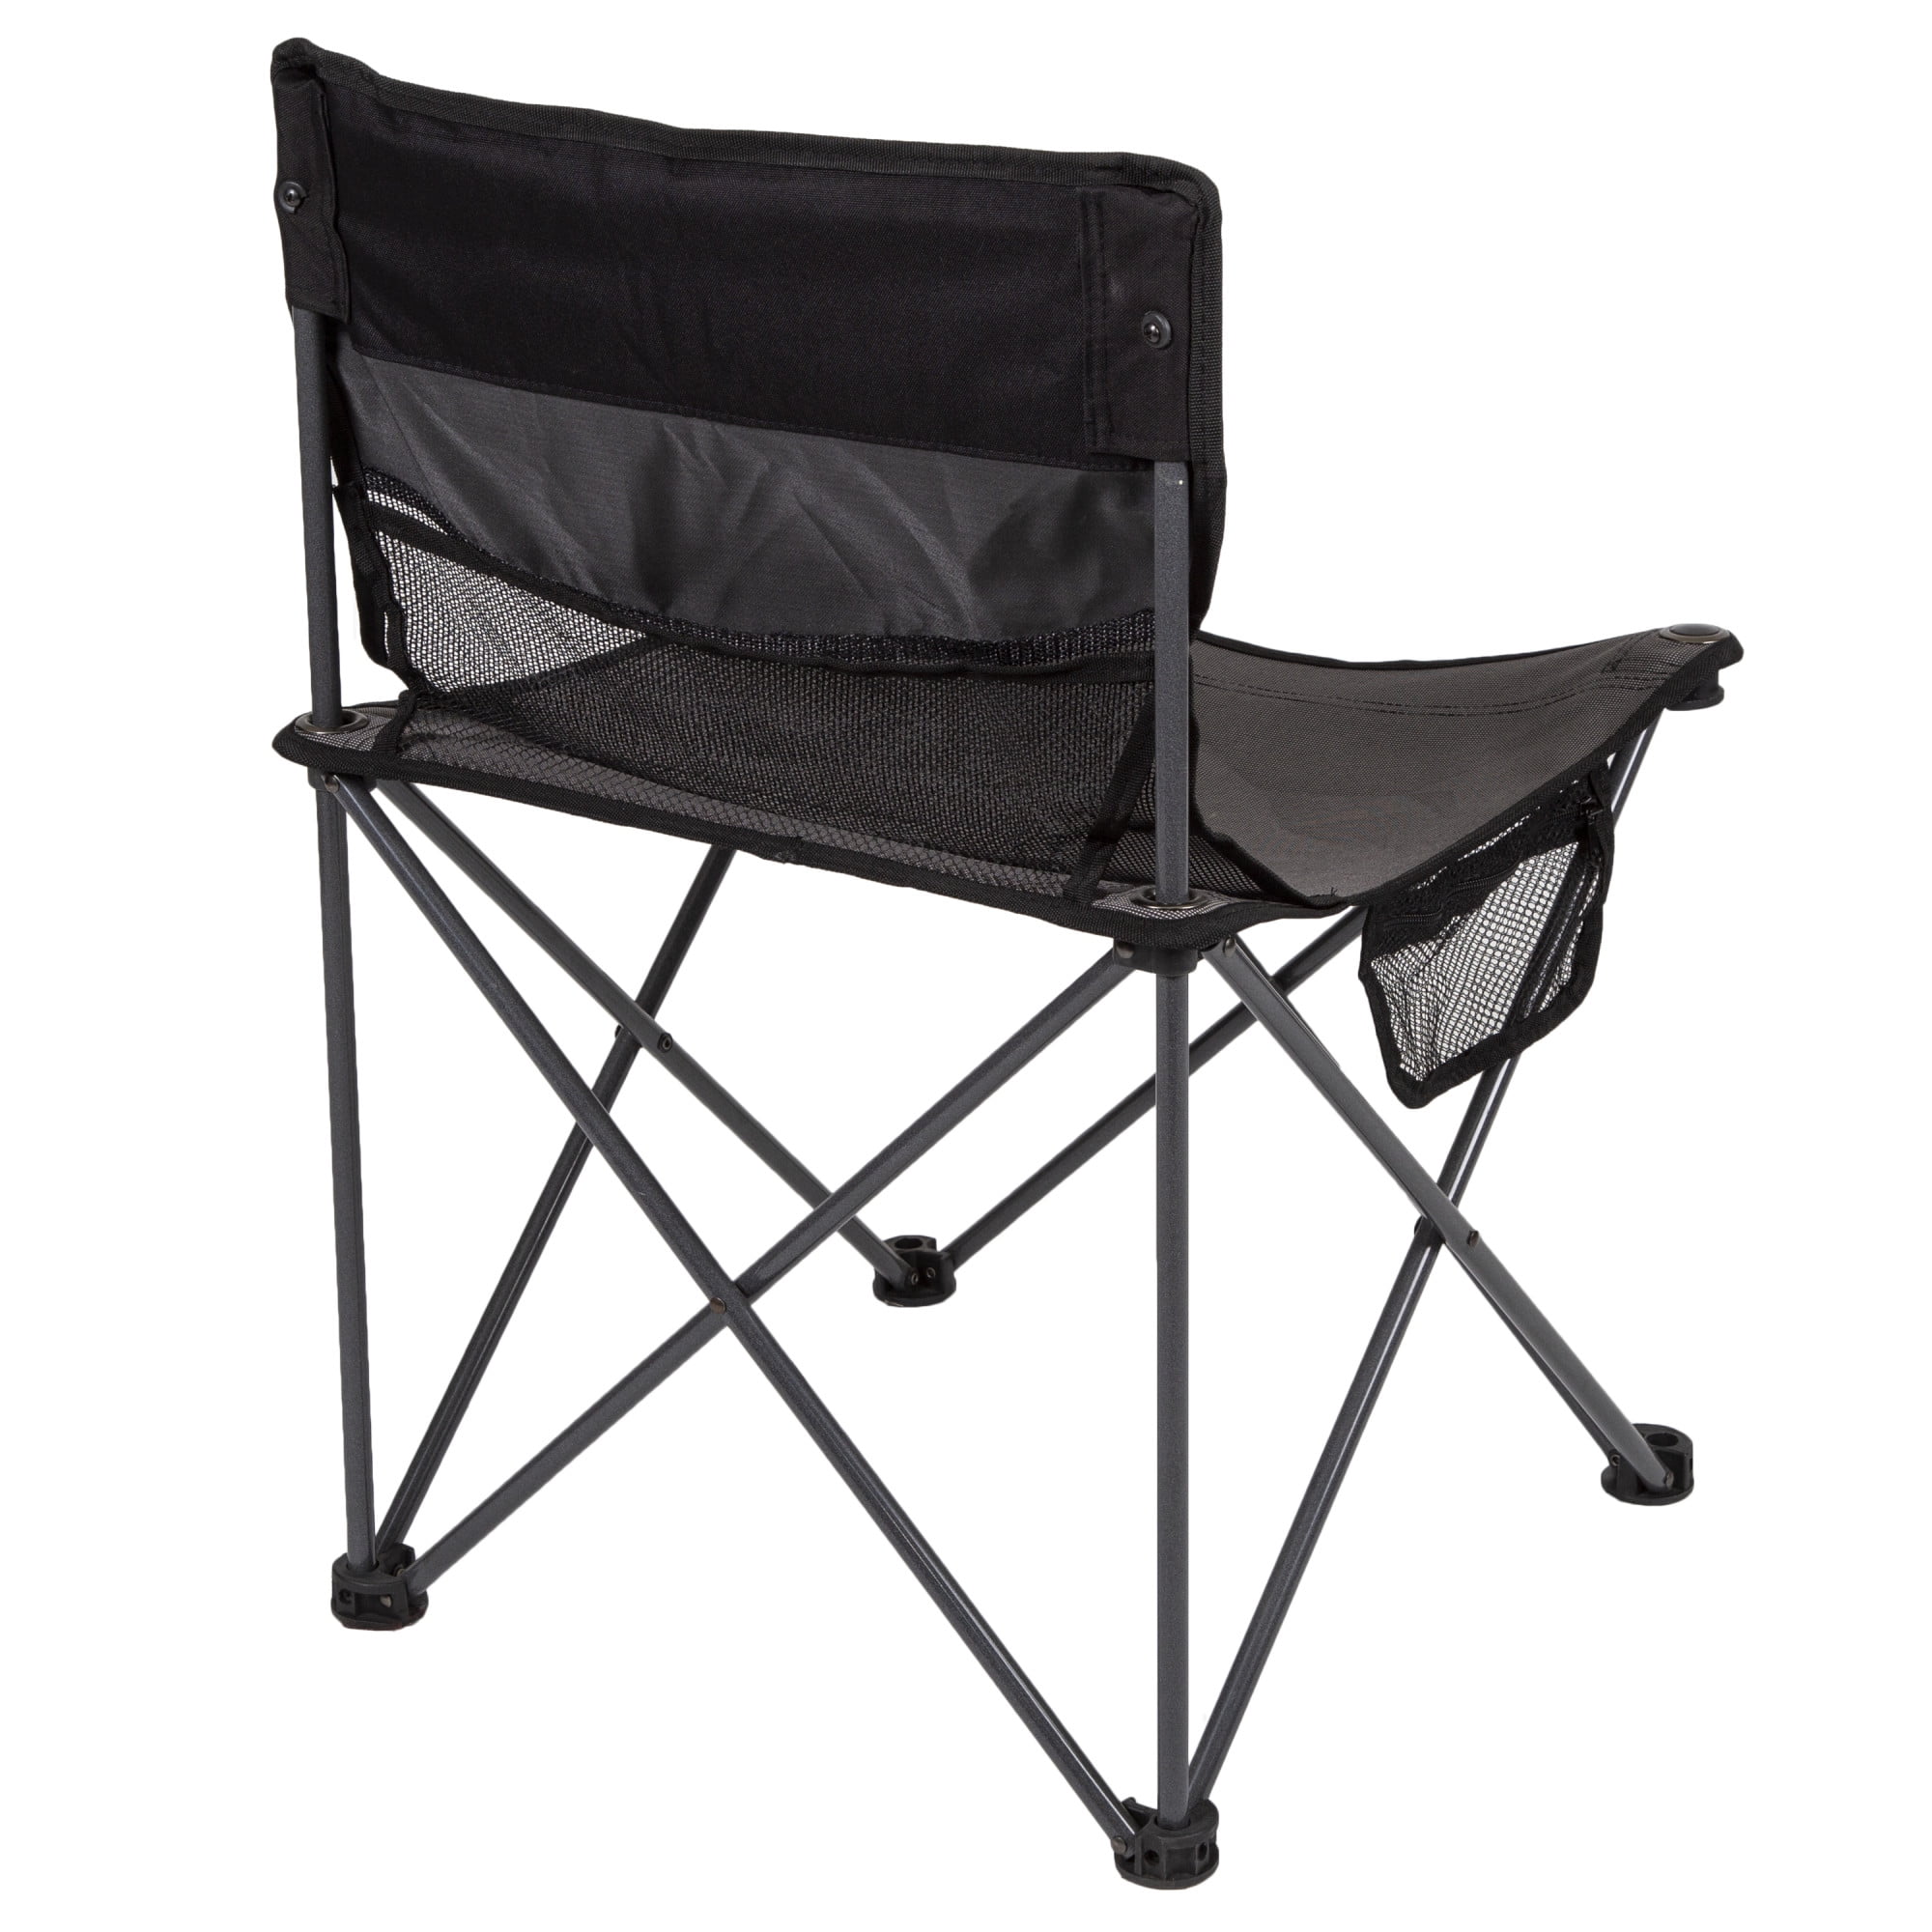 Buy Stansport Deluxe Utility Arm Chair with Fishing Pole Holder & Should  Online at Low Prices in India 